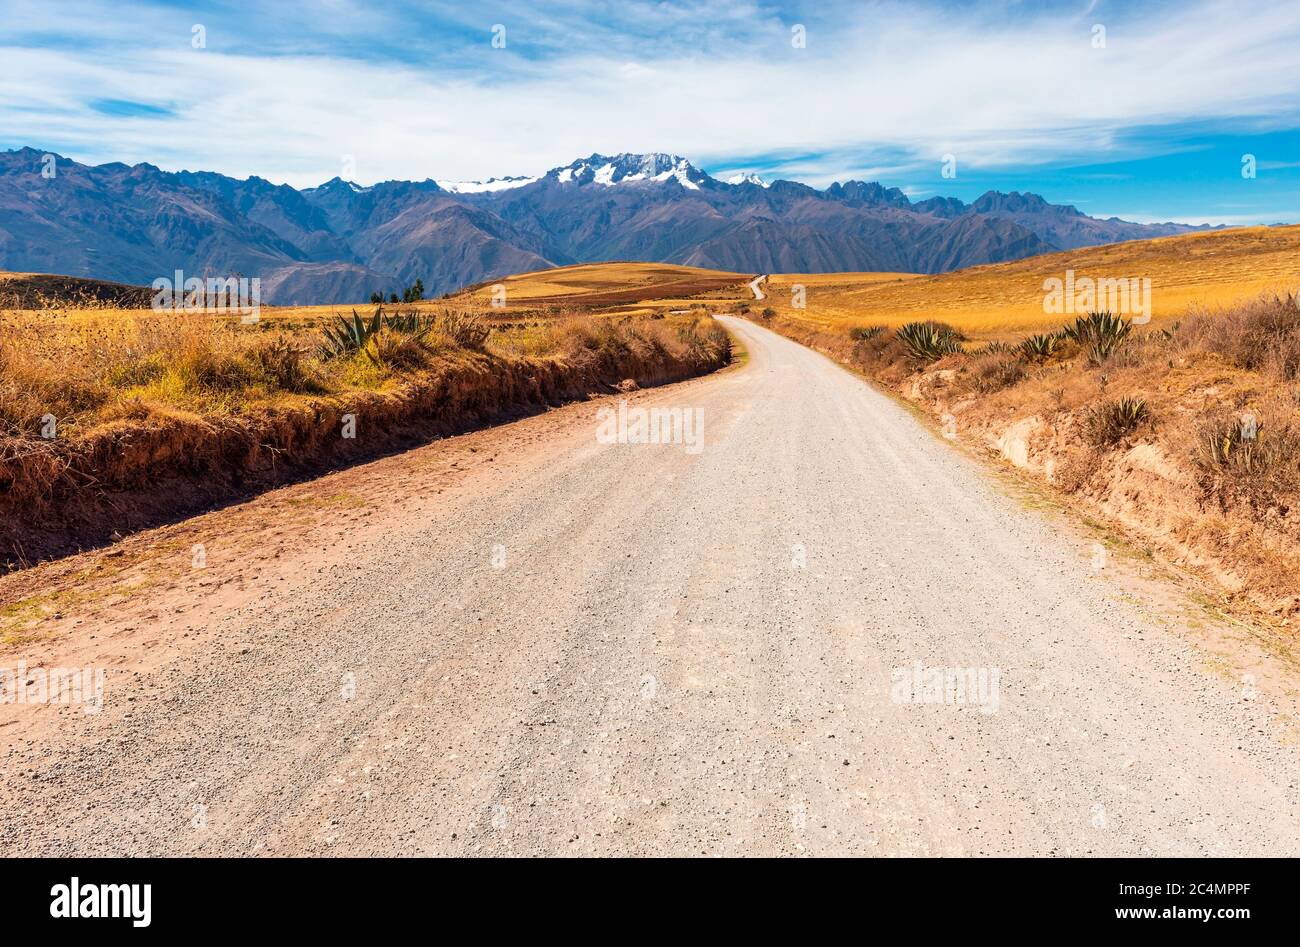 On the road in the Sacred Valley of the Inca, Cusco, Peru. Stock Photo